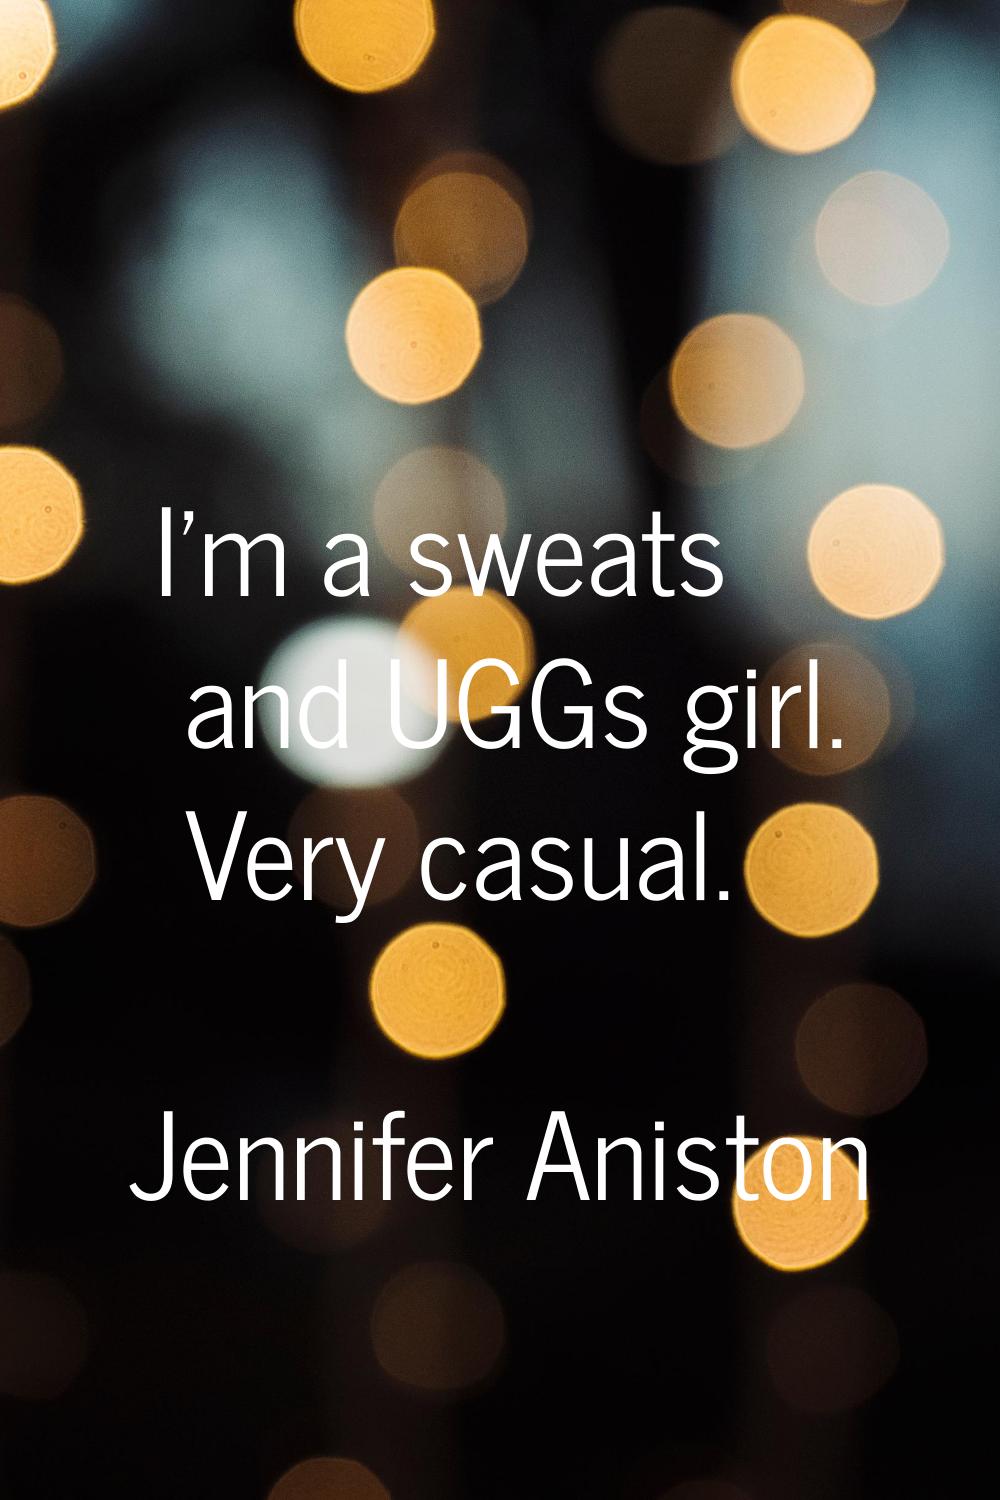 I'm a sweats and UGGs girl. Very casual.